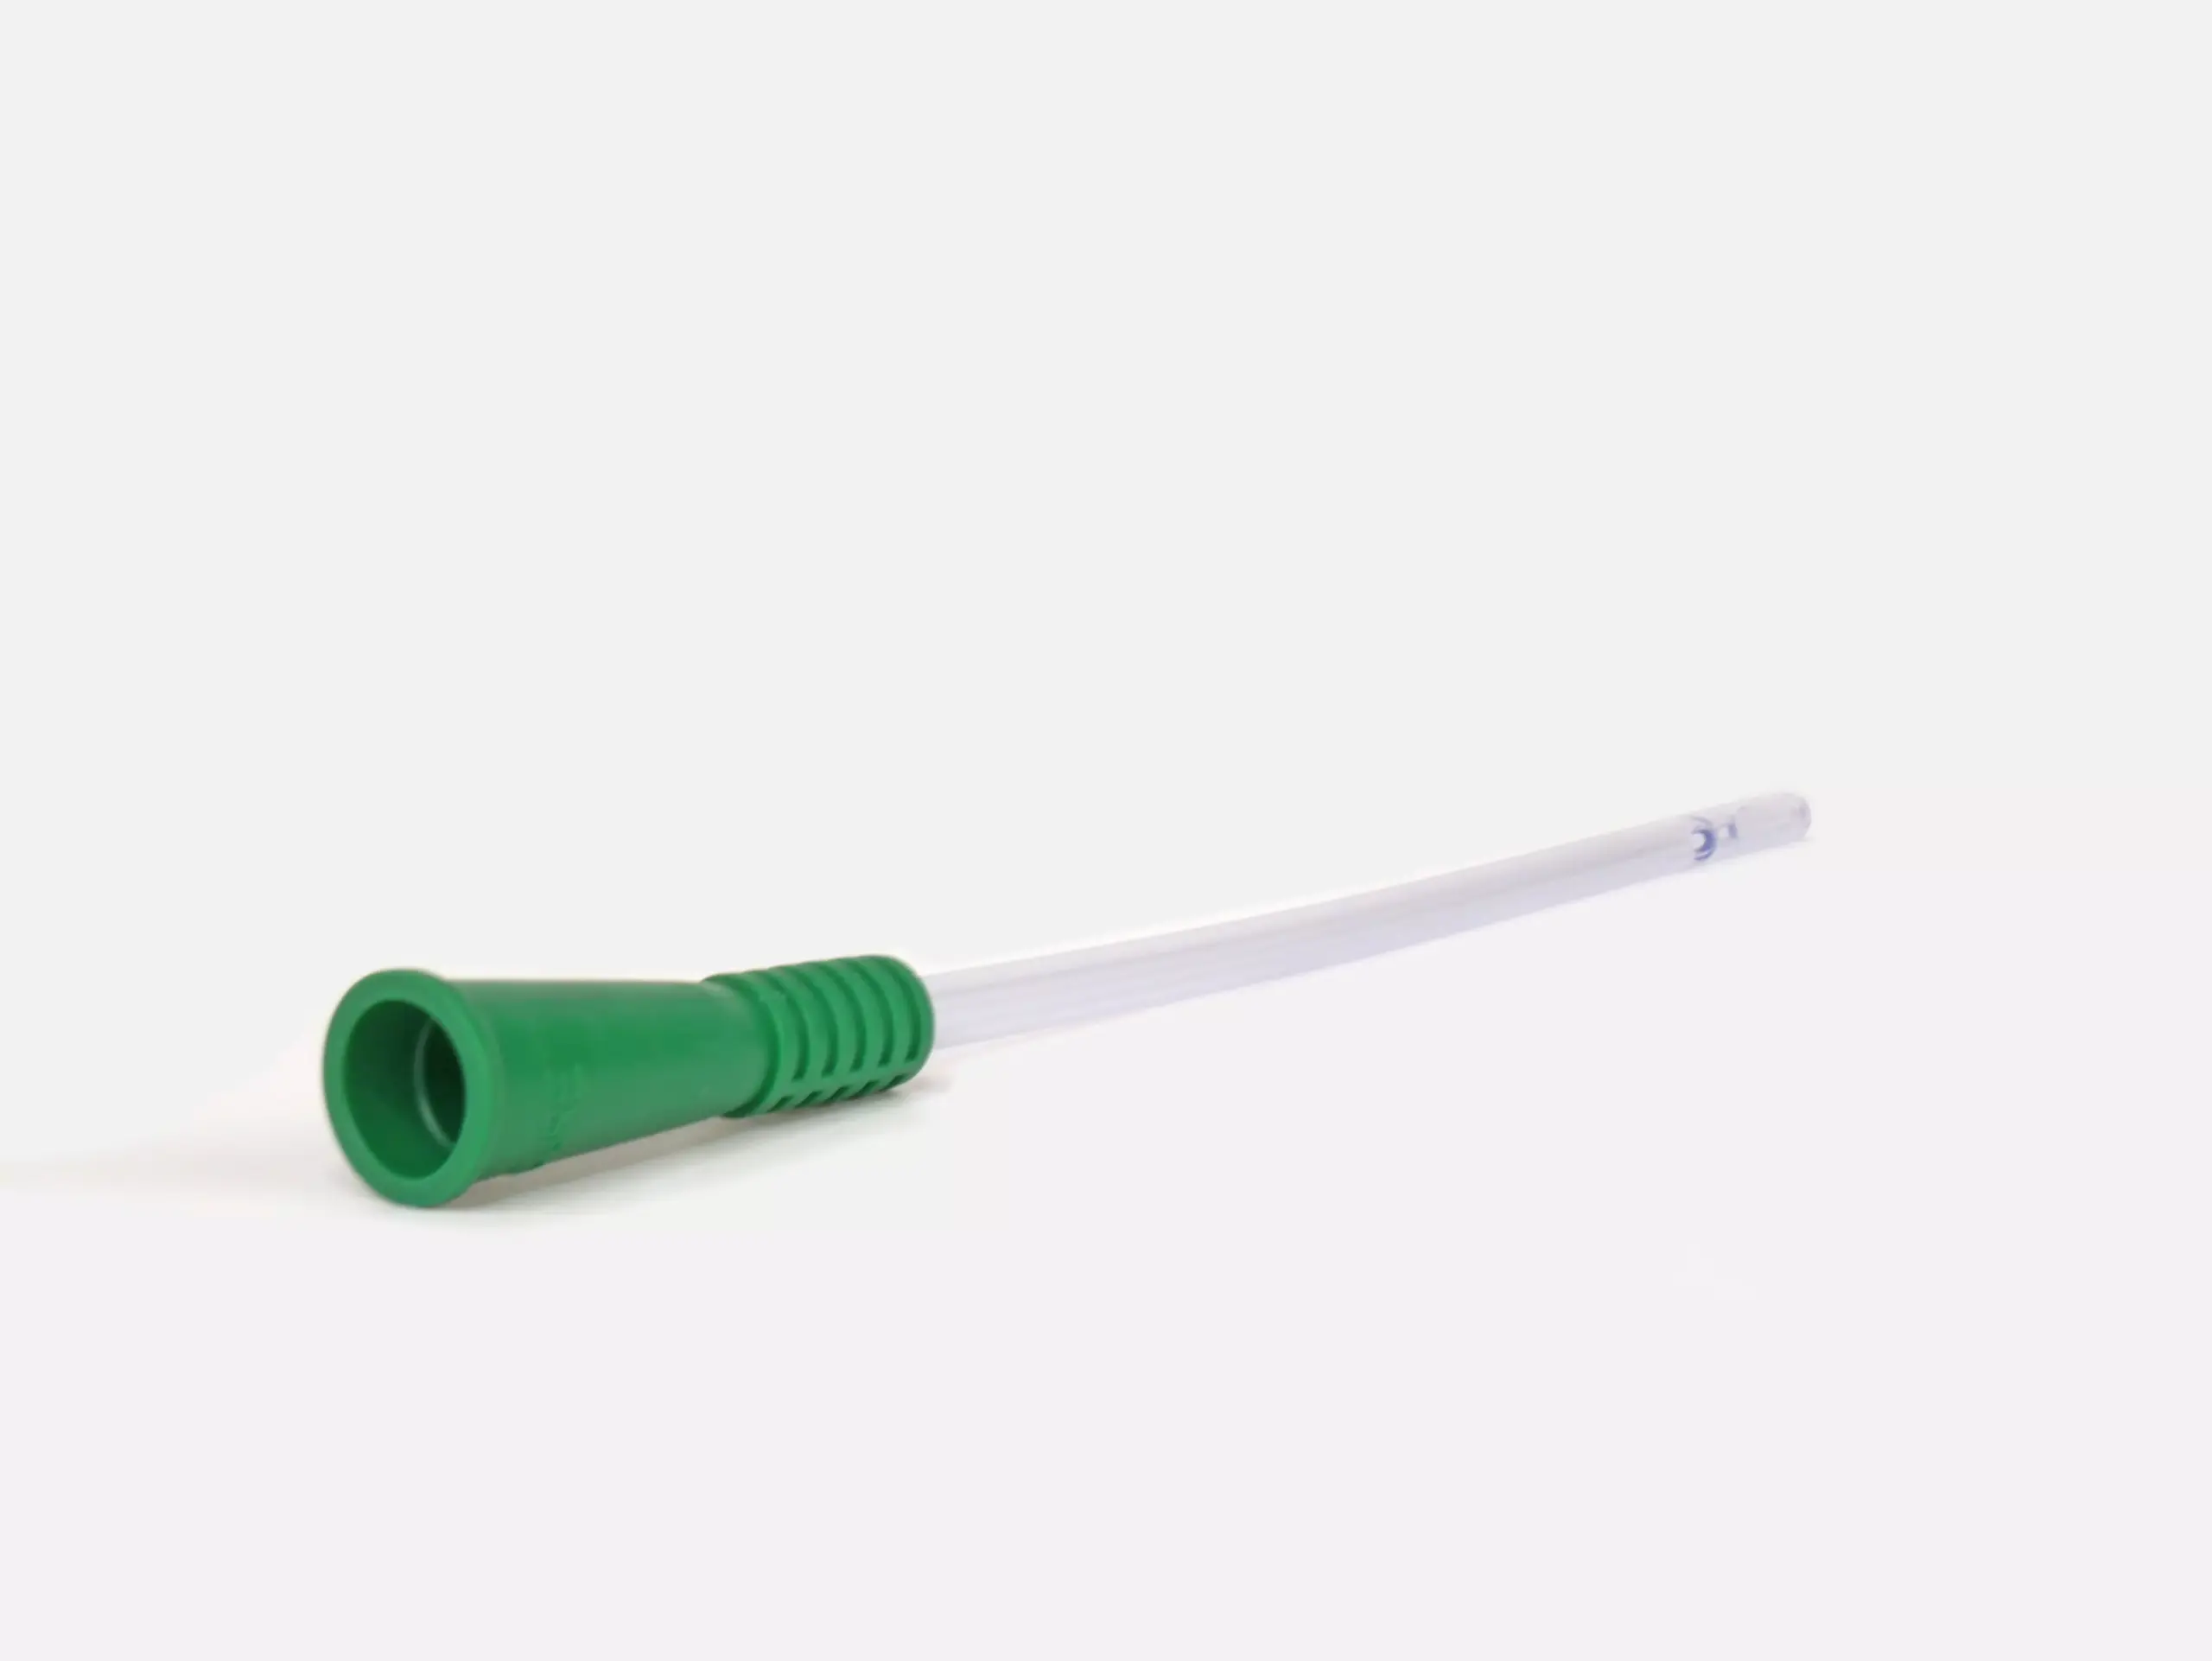 Close-up product image photograph of one of the RA Fischer Co.'s catheters available for urological care. Cure brand. Focus of the photograph is the green gripper sleeve on the end of the catheter